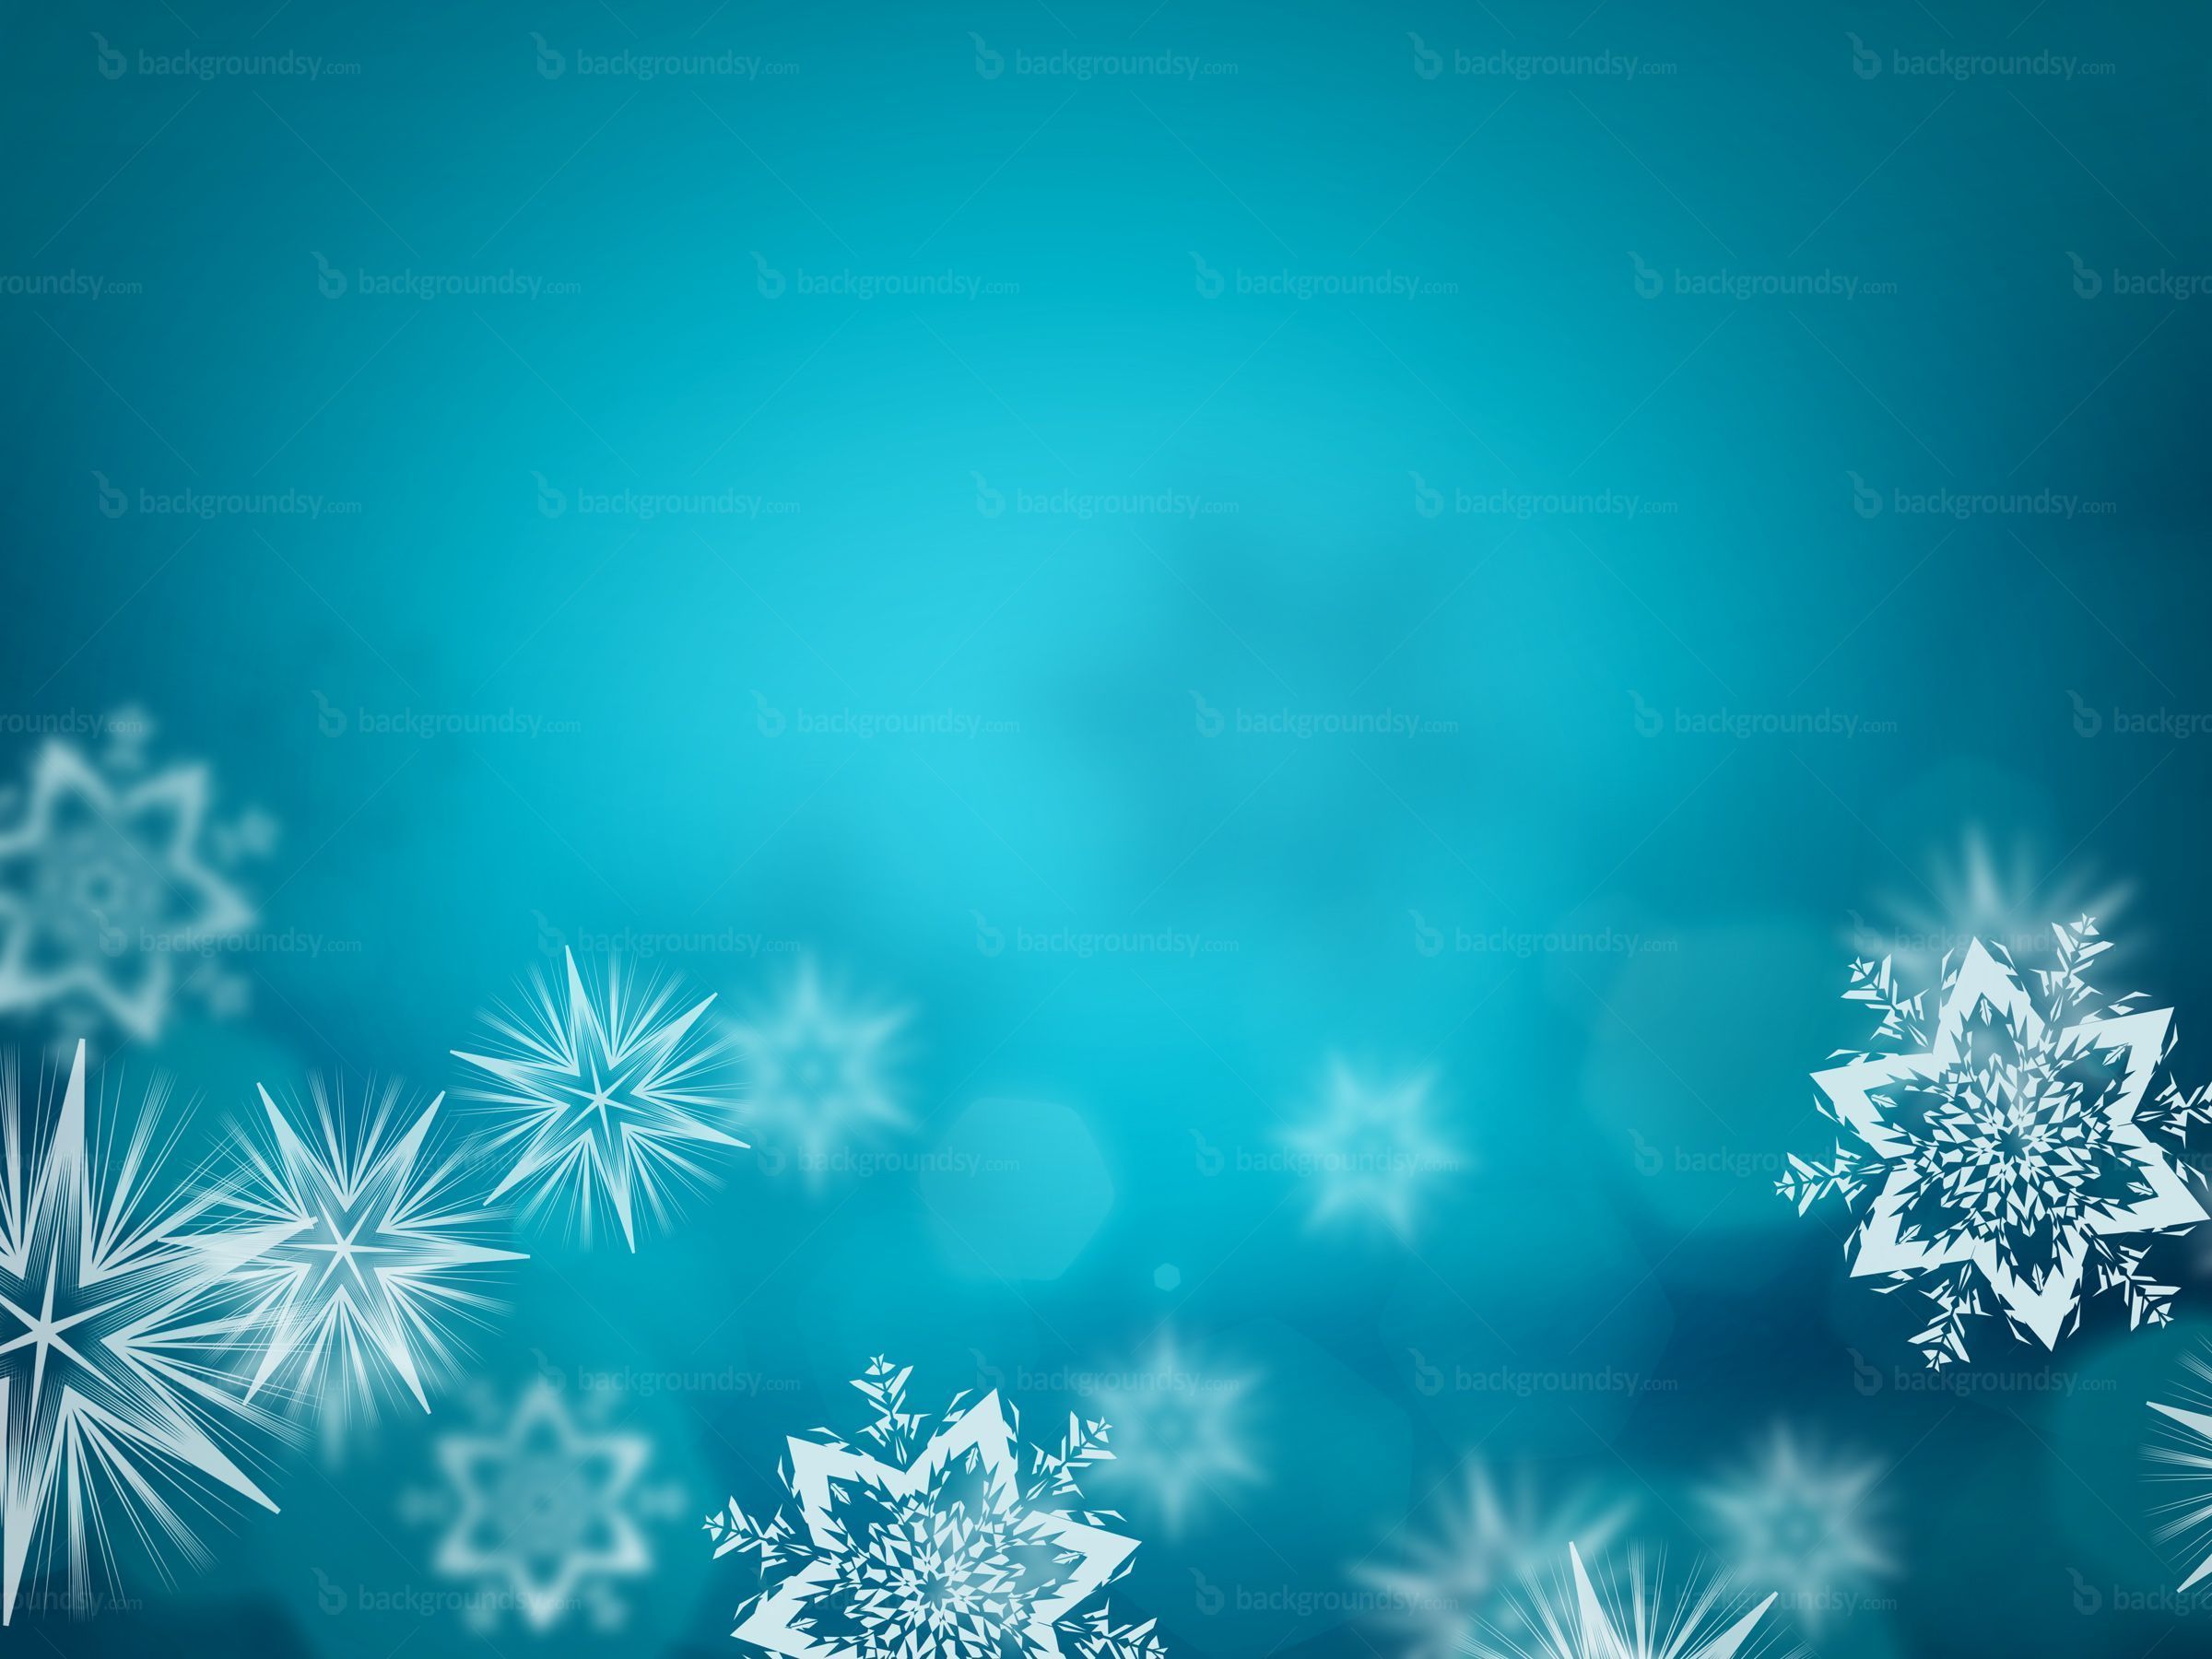 2400x1800 Abstract winter background on WallpaperBat